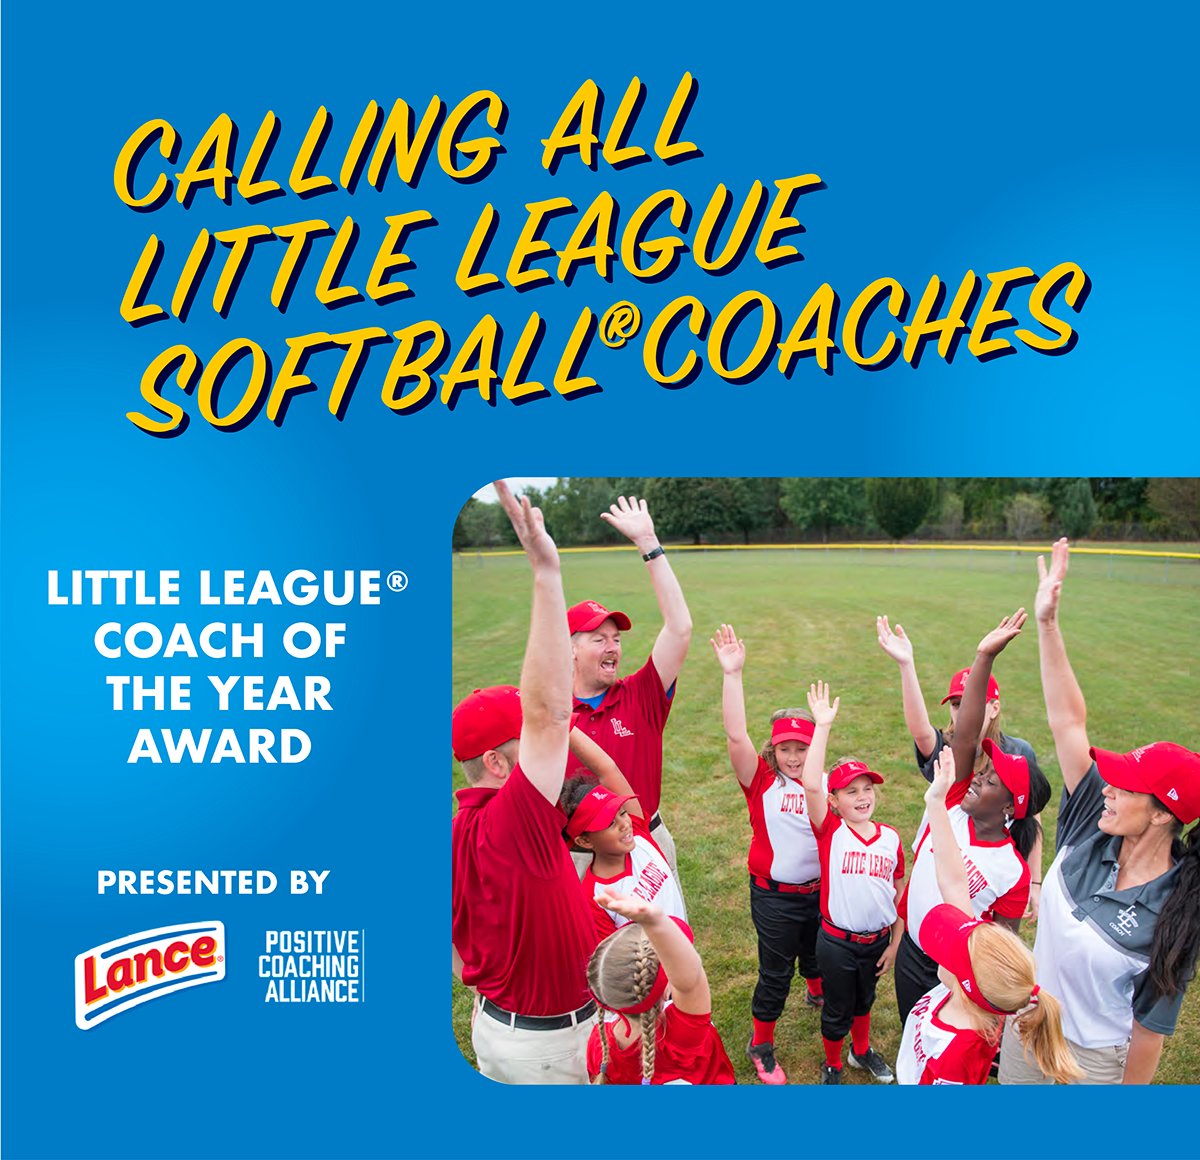 Do you know a Little League Softball coach goes above and beyond for their community? Nominate them for this year’s Coach of the Year award TODAY, brought to you by @LanceSnacks, the Official Snack of Little League, and @PositiveCoachUS! positivecoach.org/lance-the-offi…